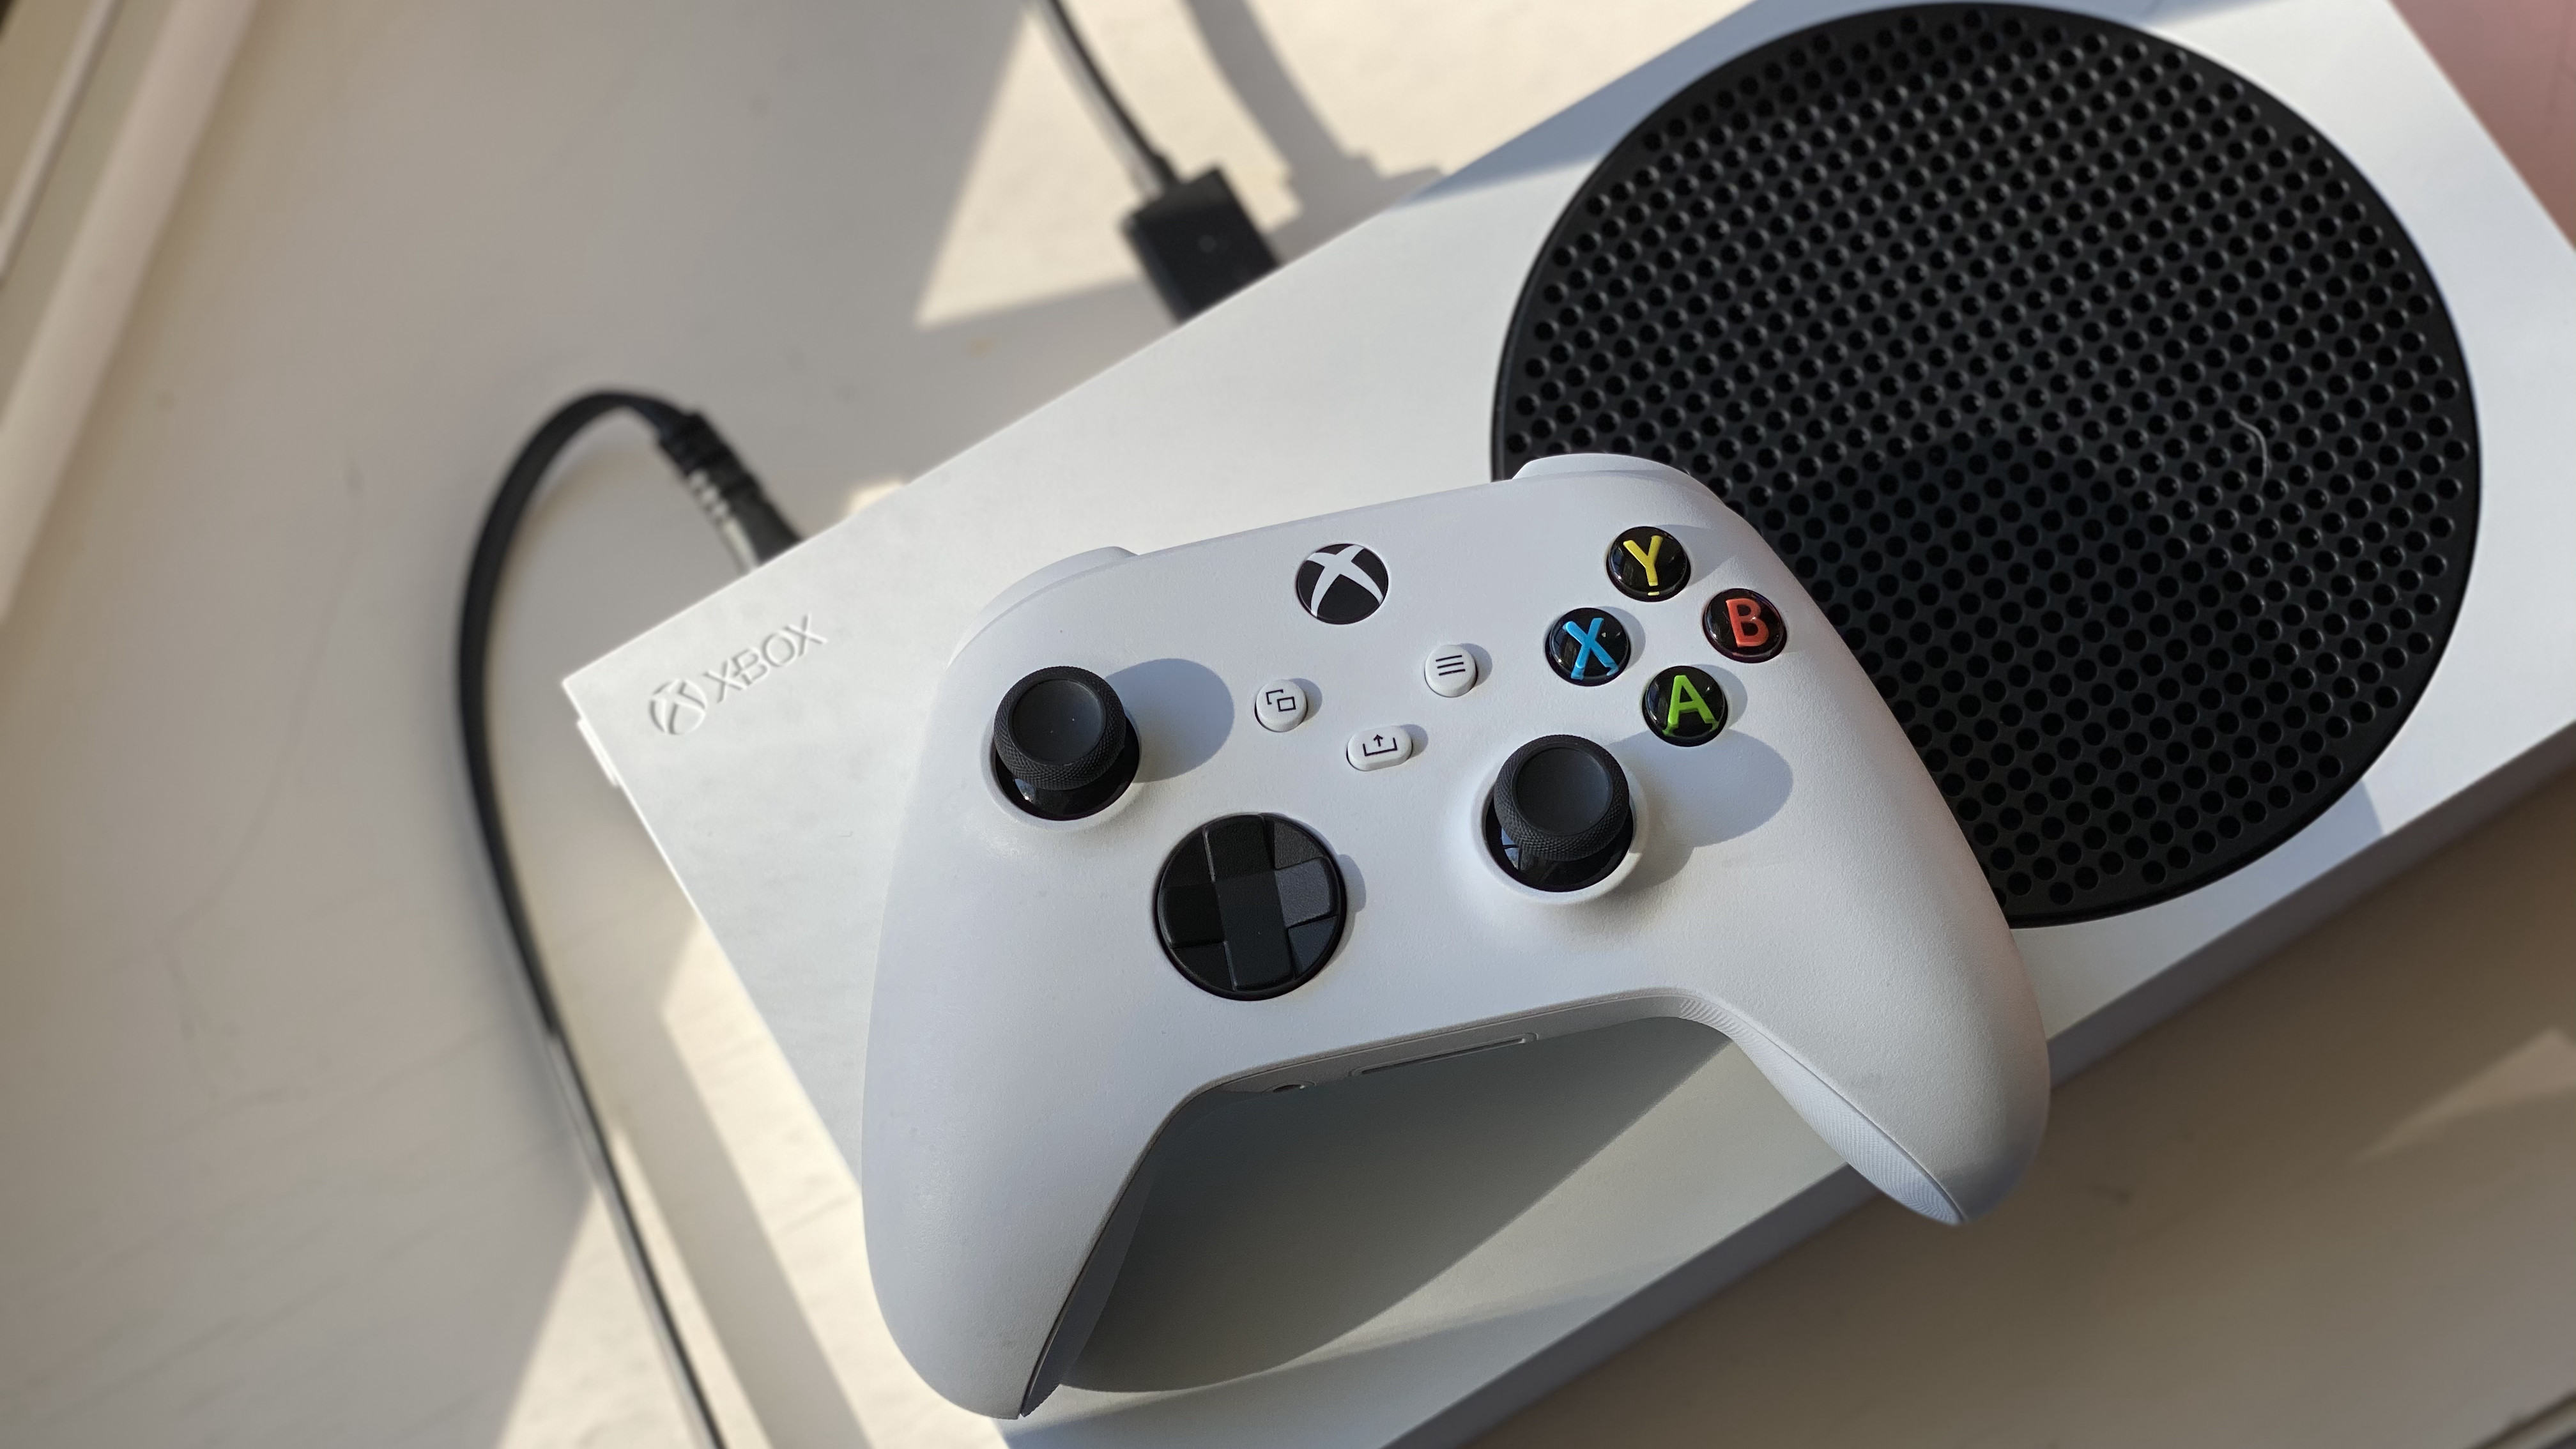 Xbox Wireless controller laying on top of the Xbox Series S